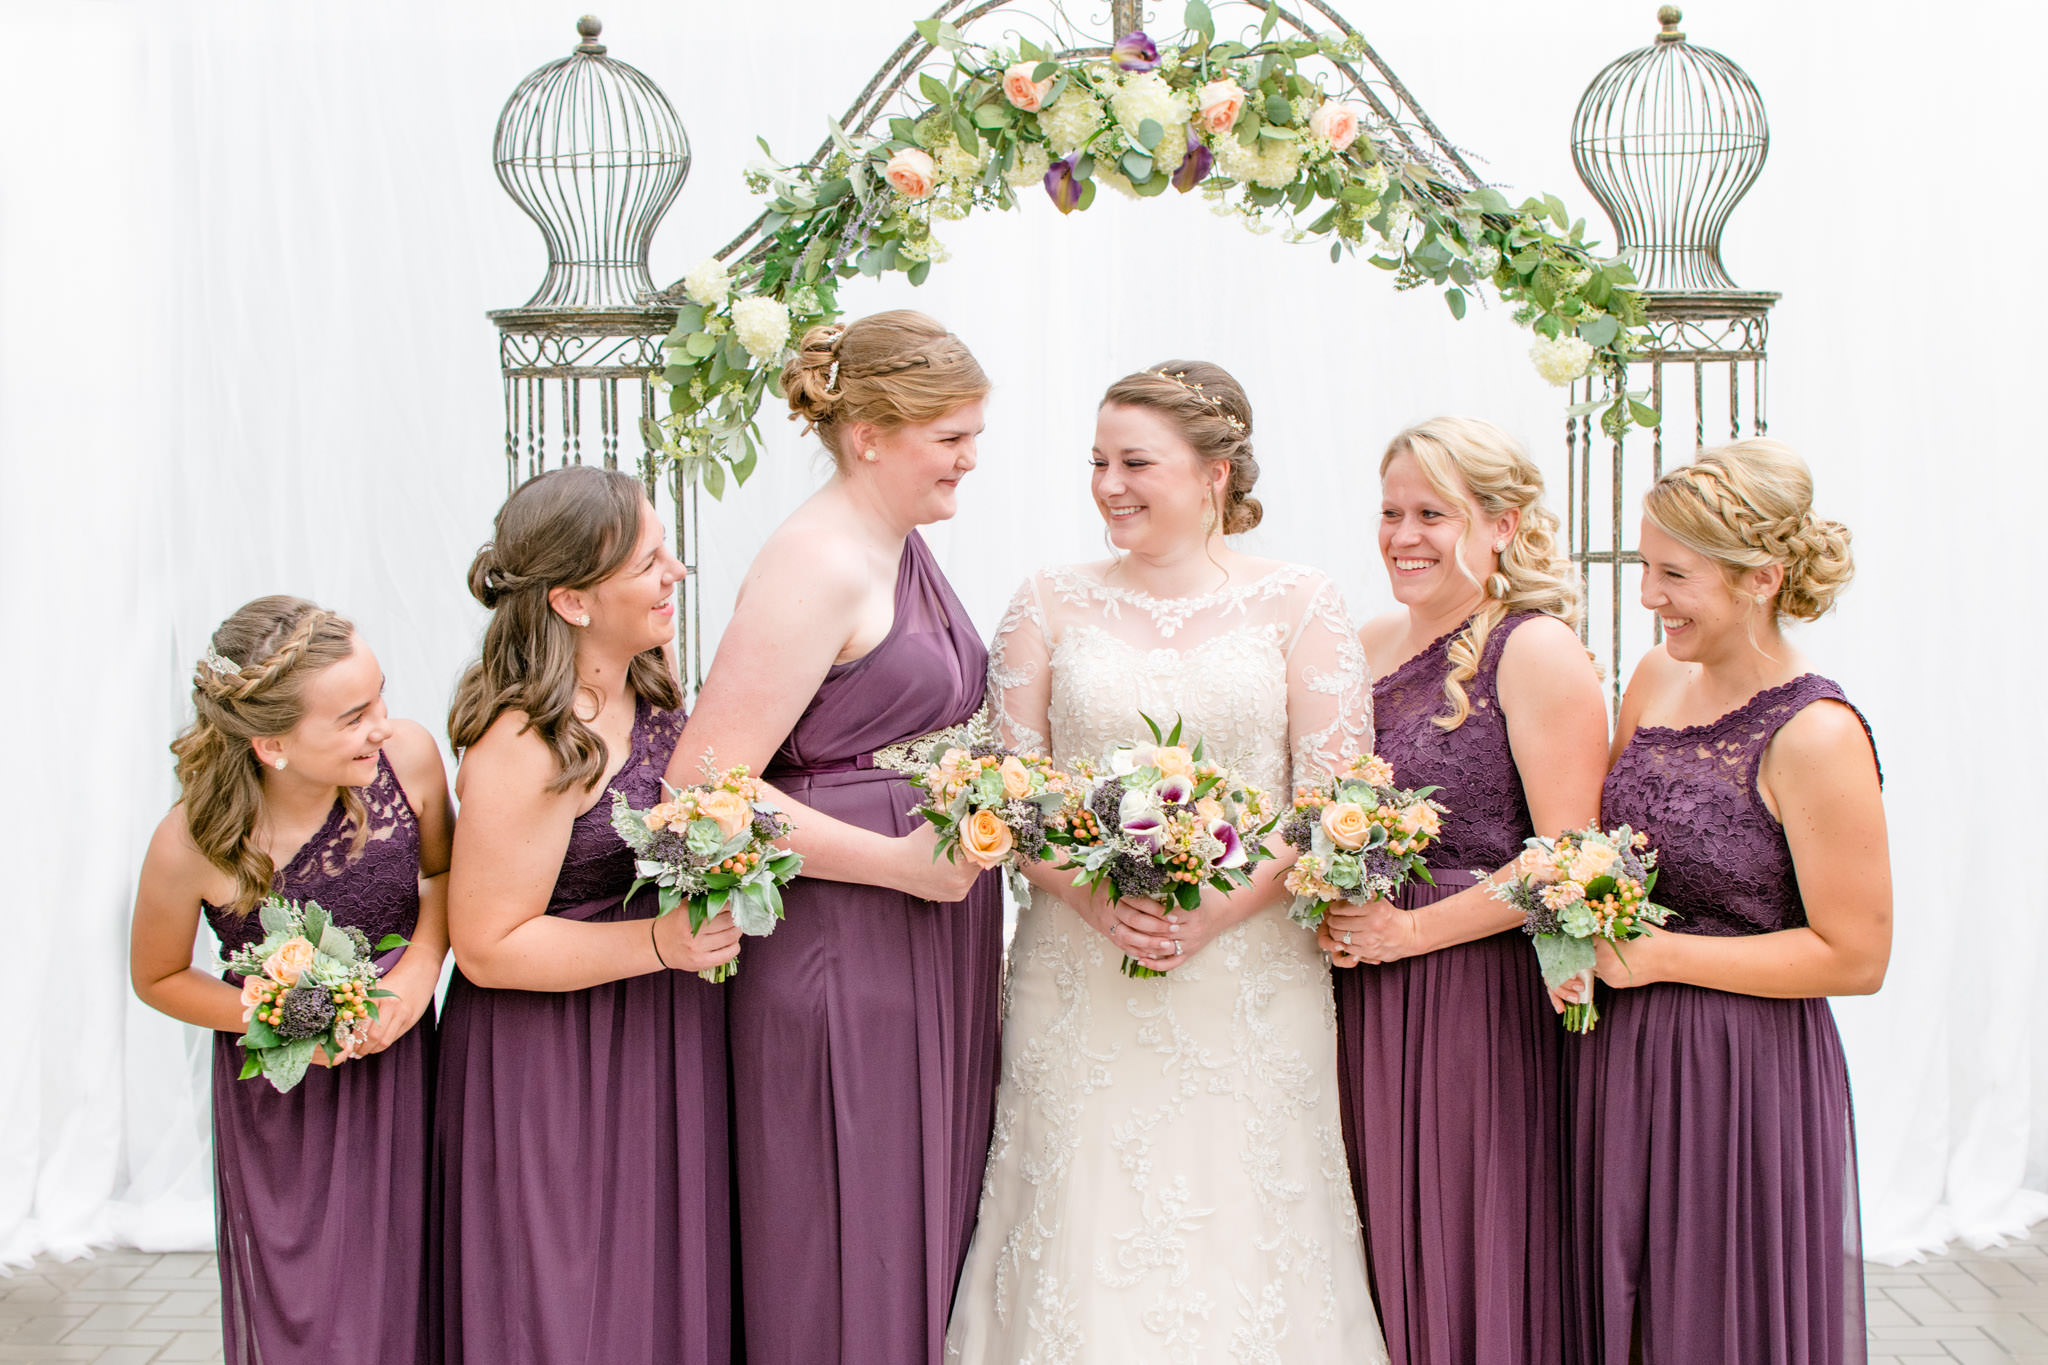 The bride and her bridal party laugh during portraits